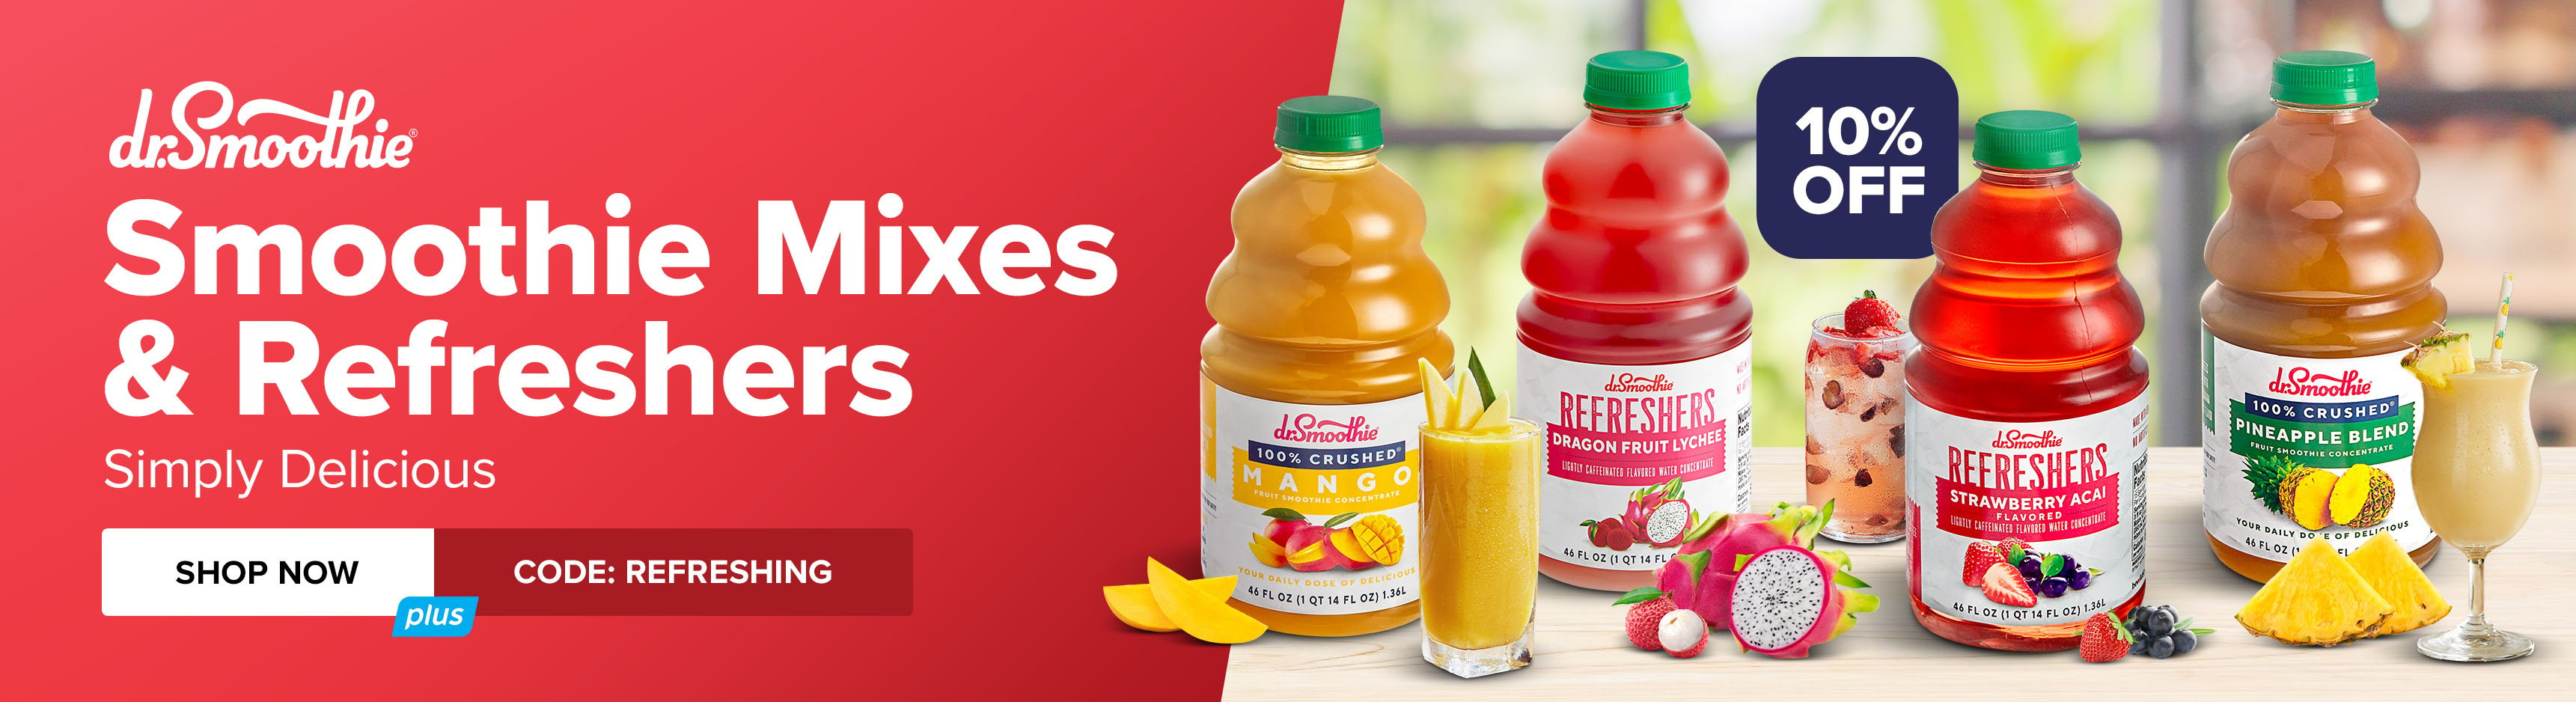 Dr. Smoothie Smoothie Mixes & Refreshers, Simply Delicious. Shop Now, Use Code: REFRESHING